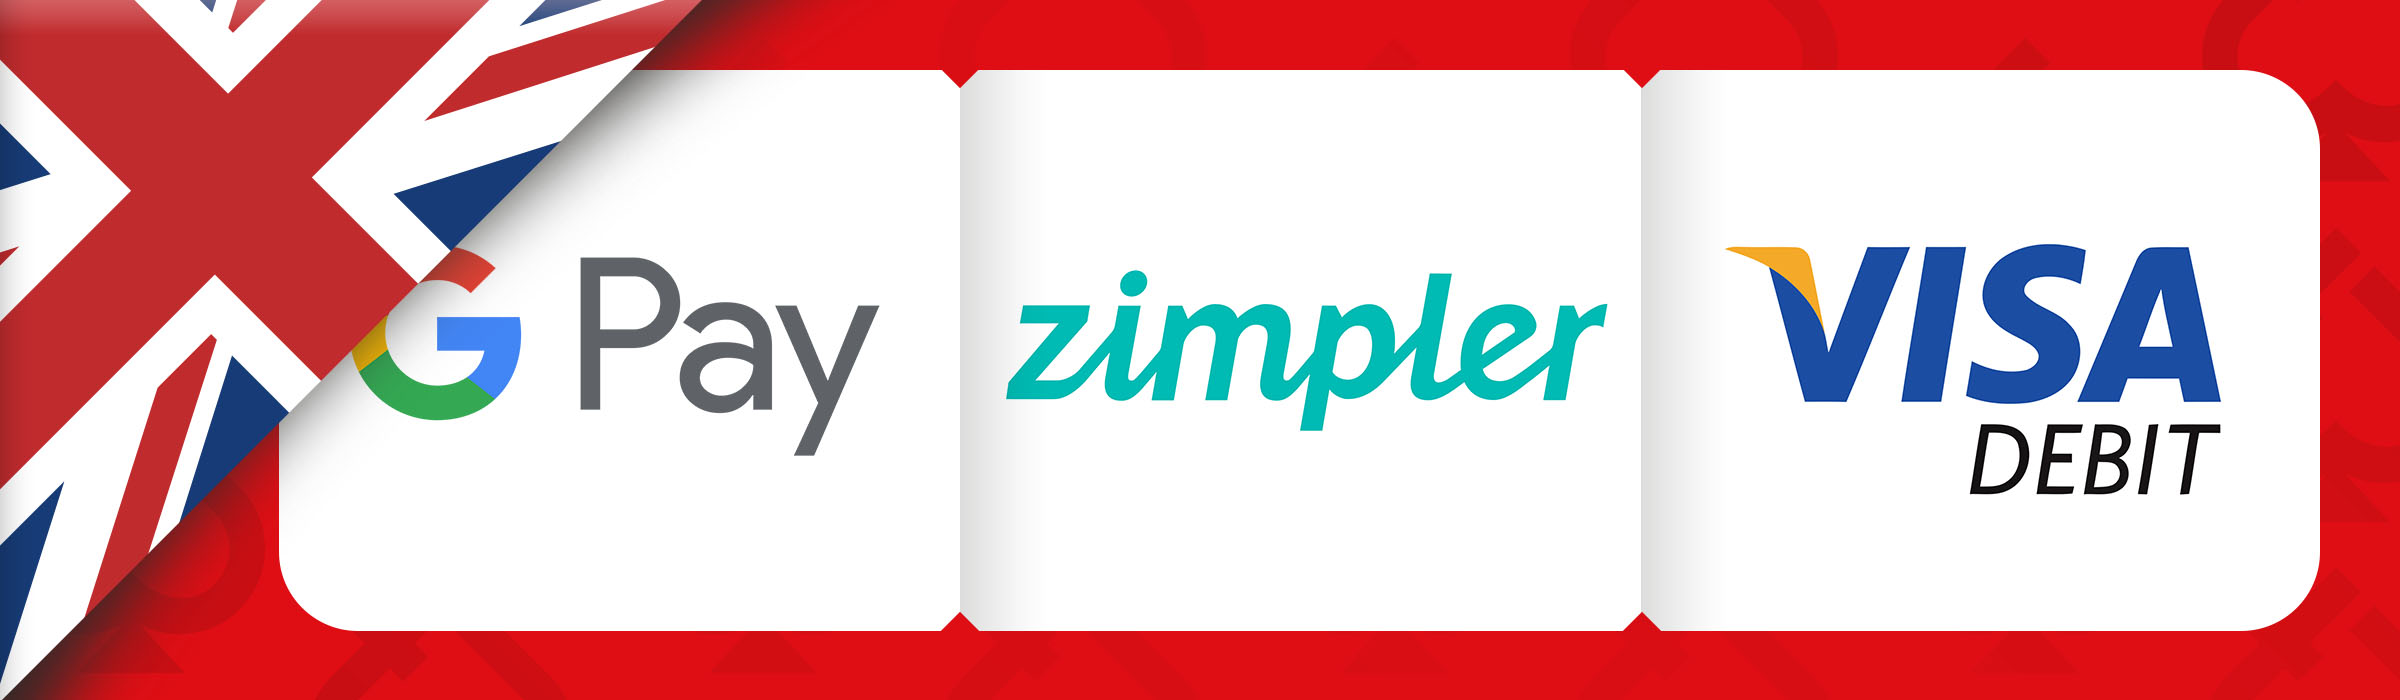 Zimpler Vs. Cards Vs. GPay - Which is Better for UK Players?